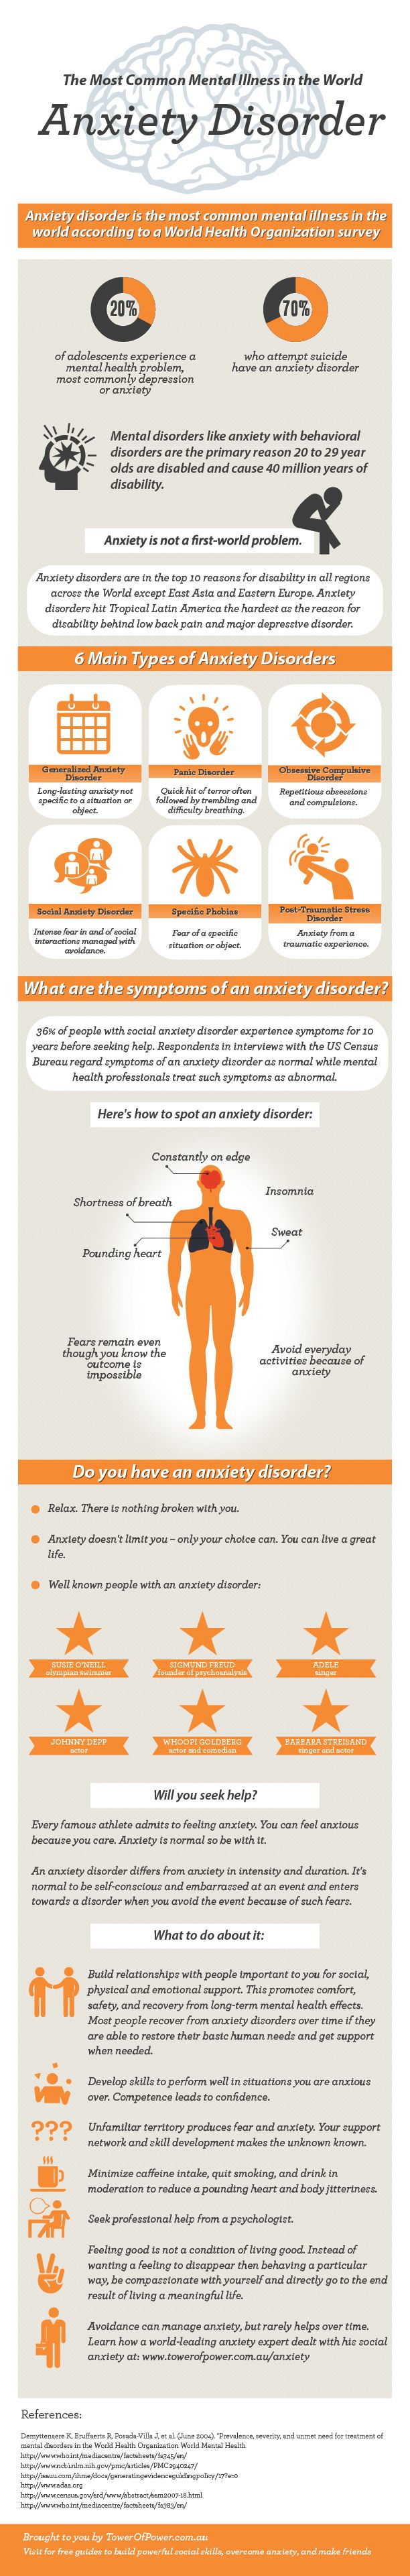  Surprising Facts About Anxiety Disorders – 7 Ways to Cope Infographic